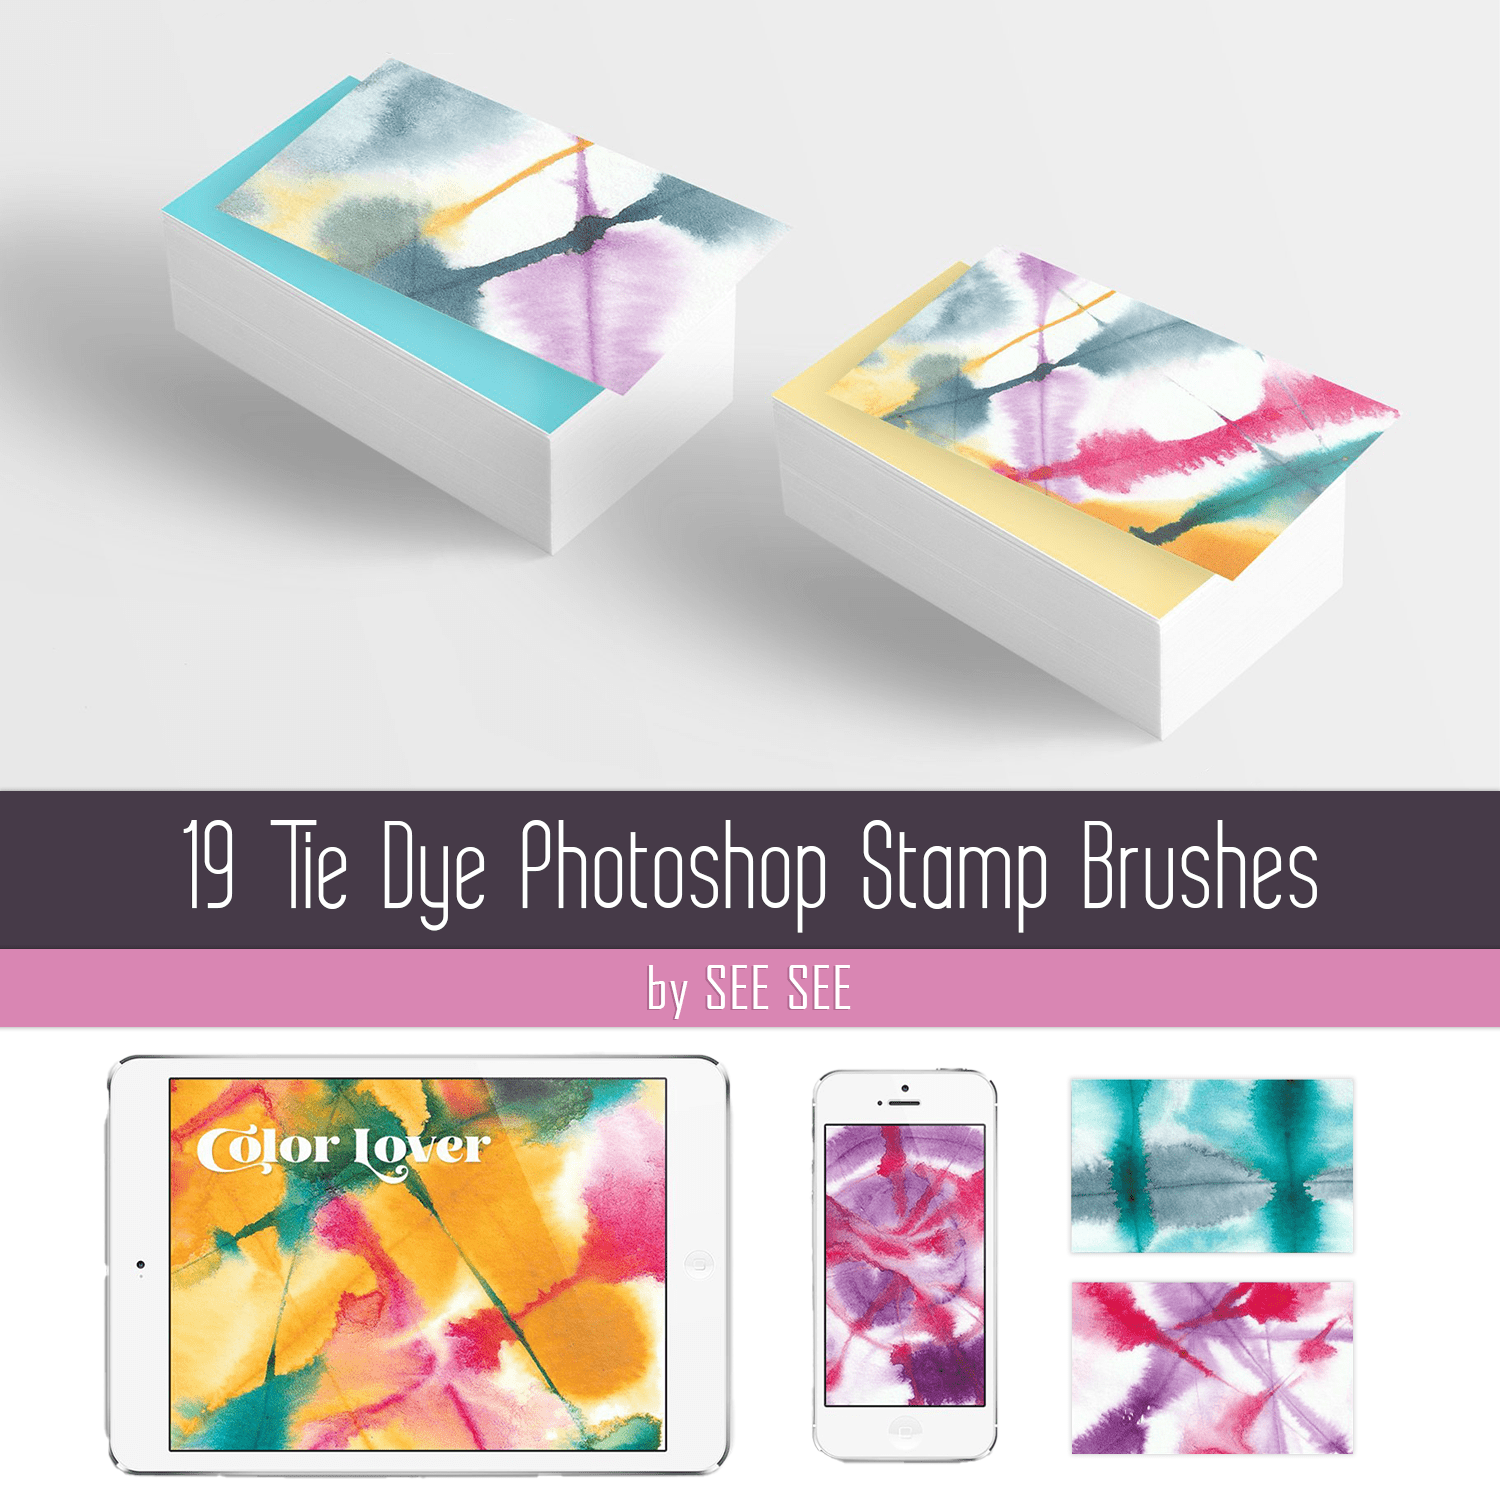 19 Tie Dye Photoshop Stamp Brushes - main image preview.